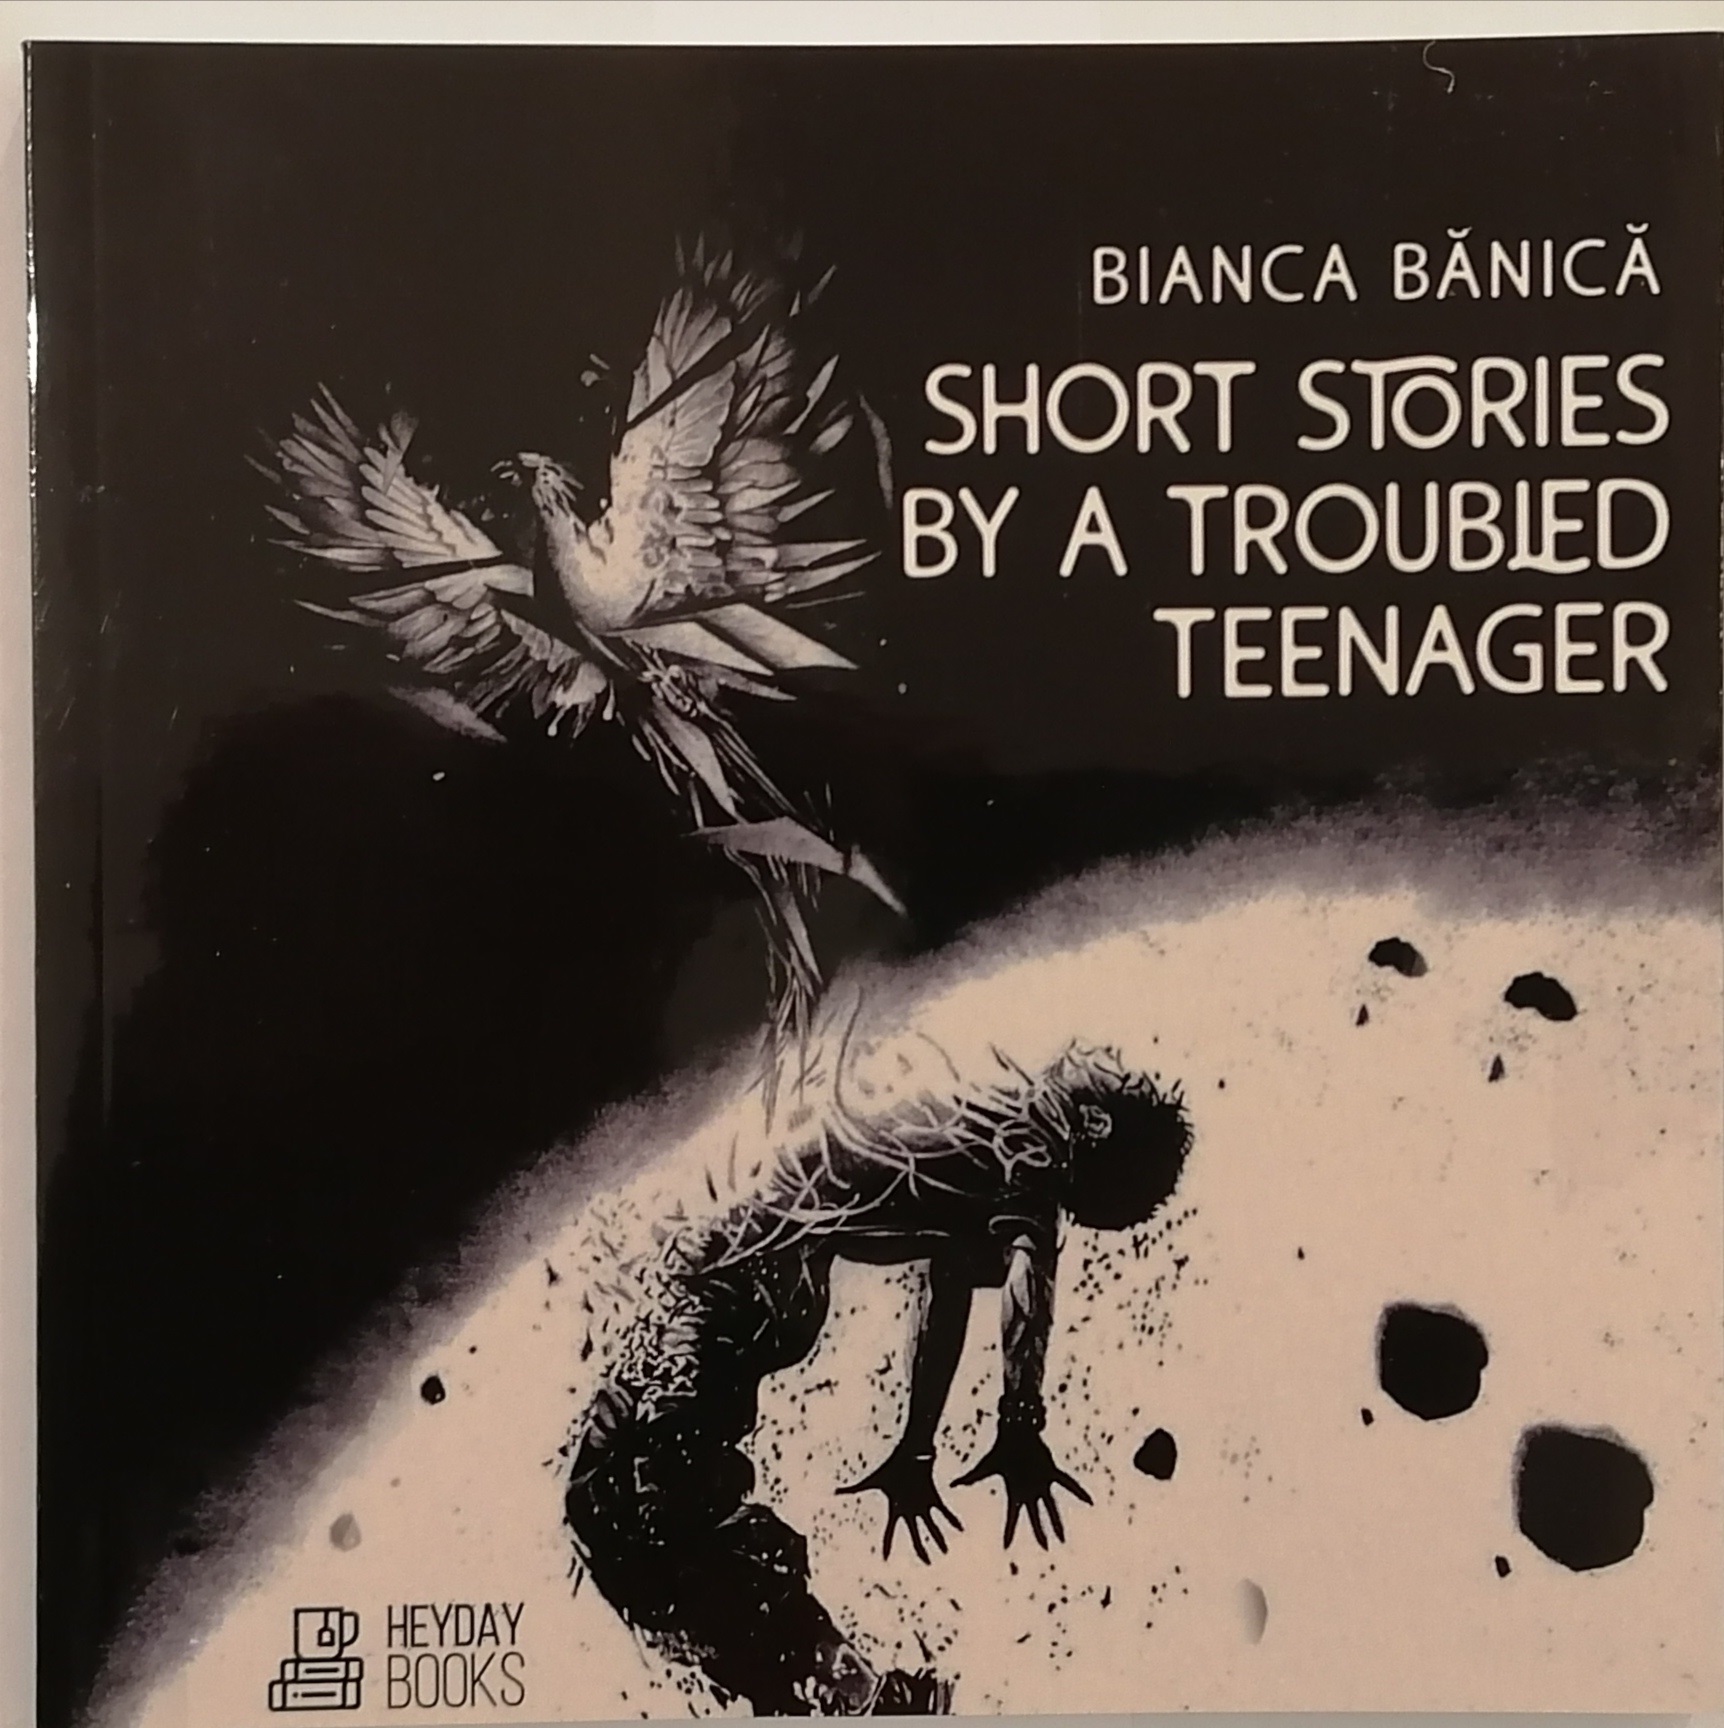 Short stories by a troubled teenager - Bianca Banica - Editura HeyDay